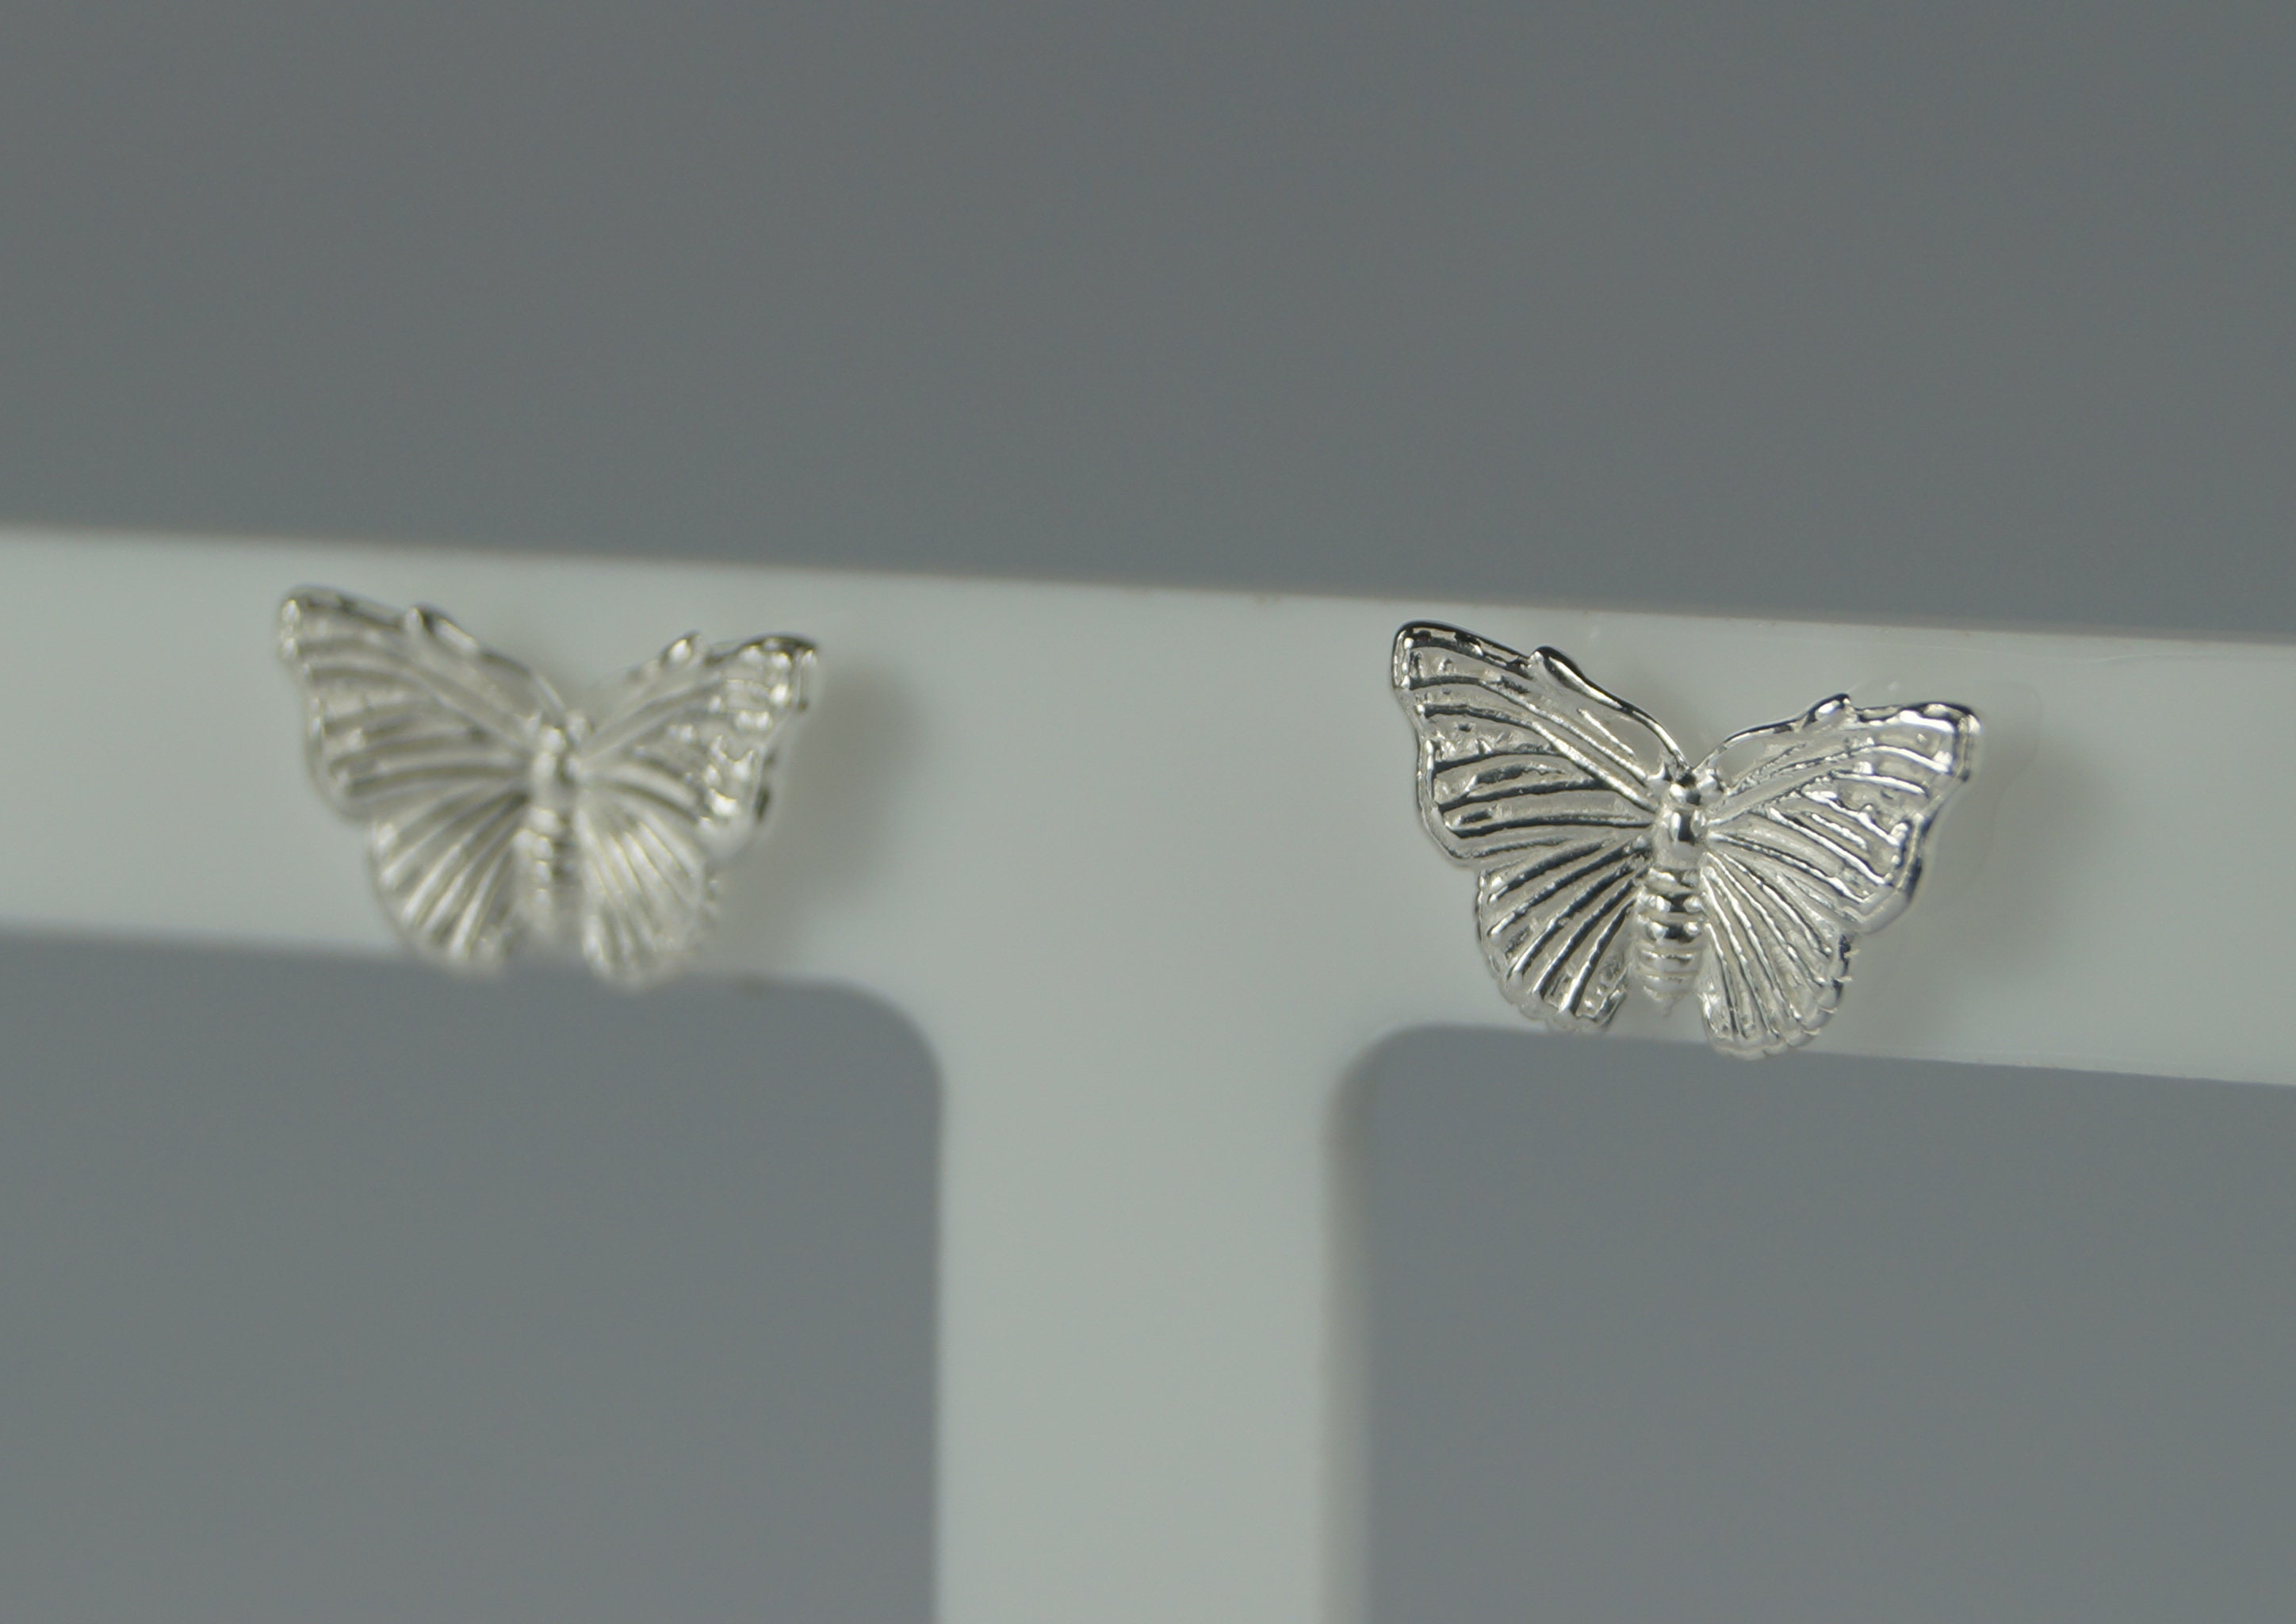 6 Mm Large Butterfly Earring Backs, Surgical Stainless Steel 201  Scrollbacks Silver Color 20 Pc. 